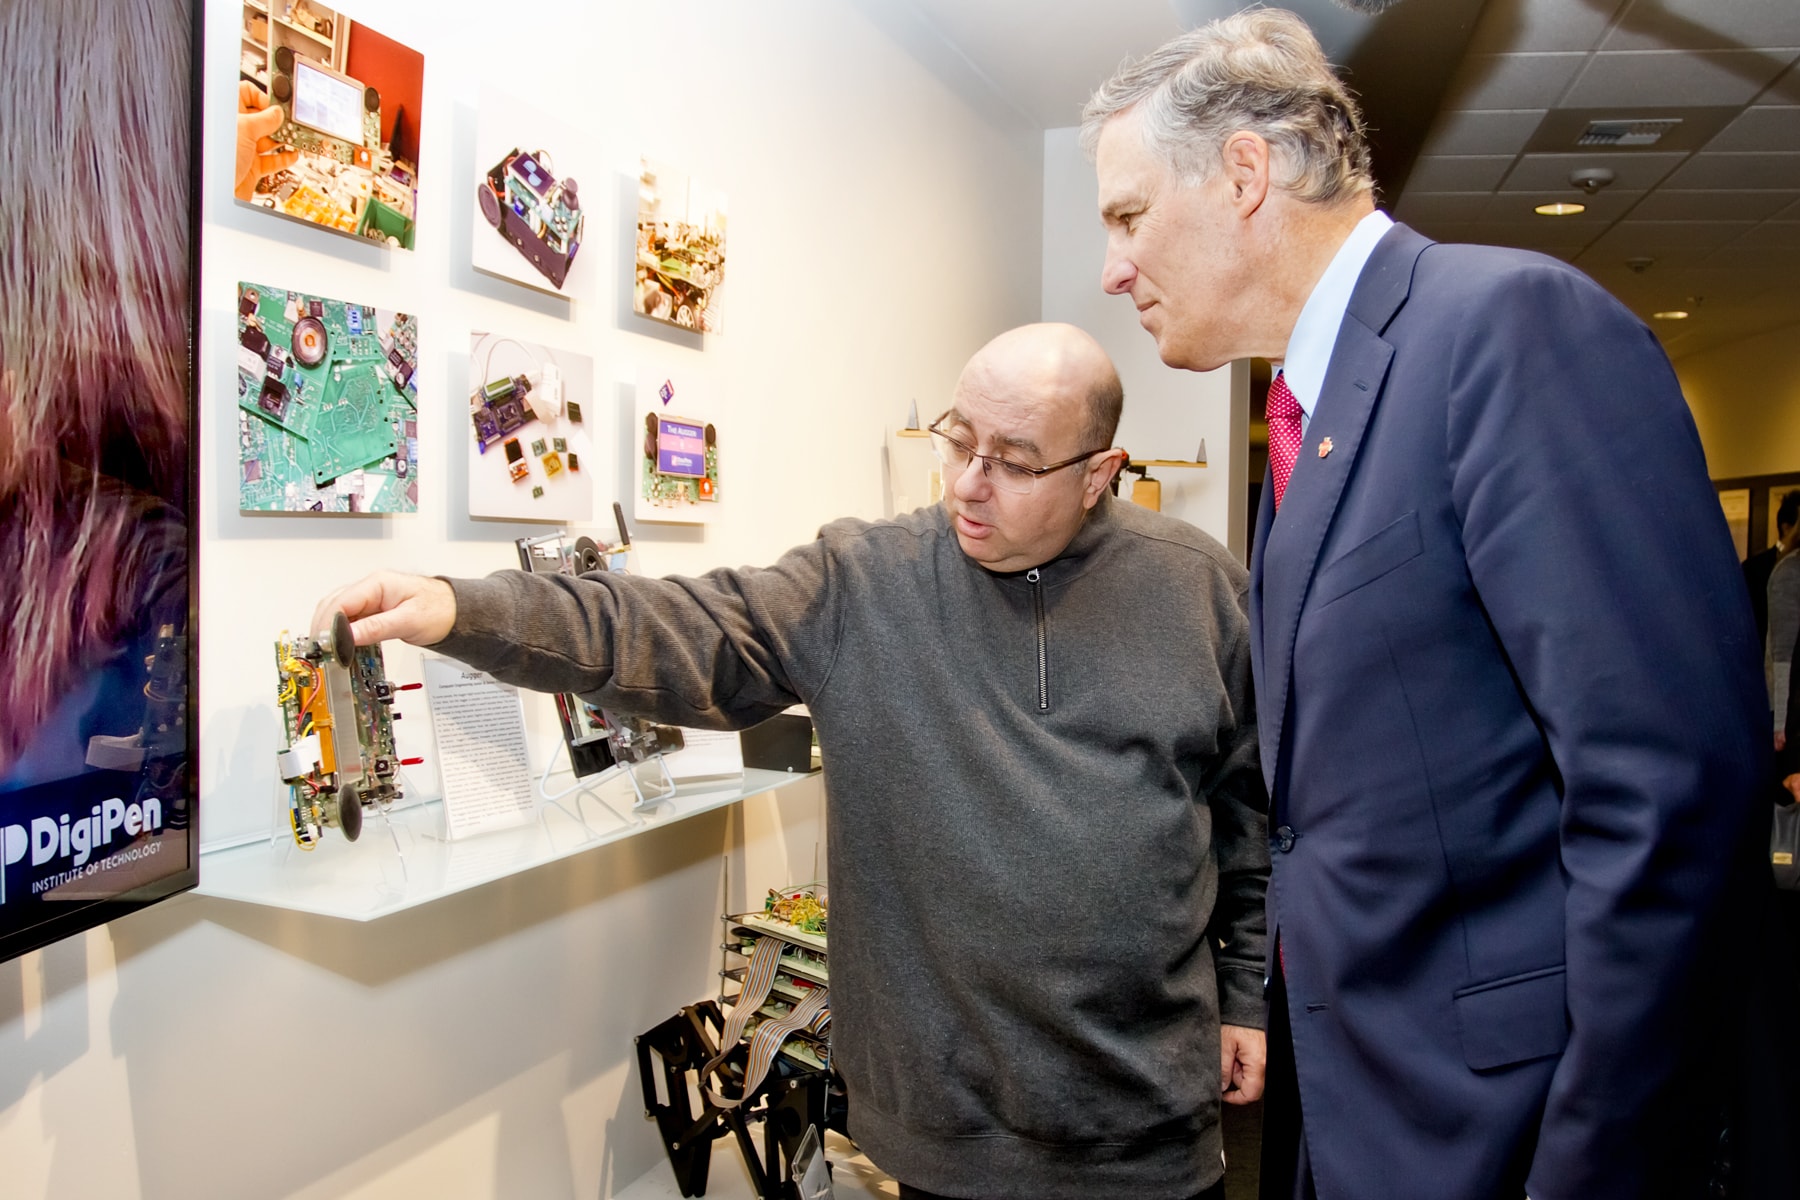 Claude Comair showing Governor Jay Inslee an example of computer engineering student work displayed in the DigiPen building